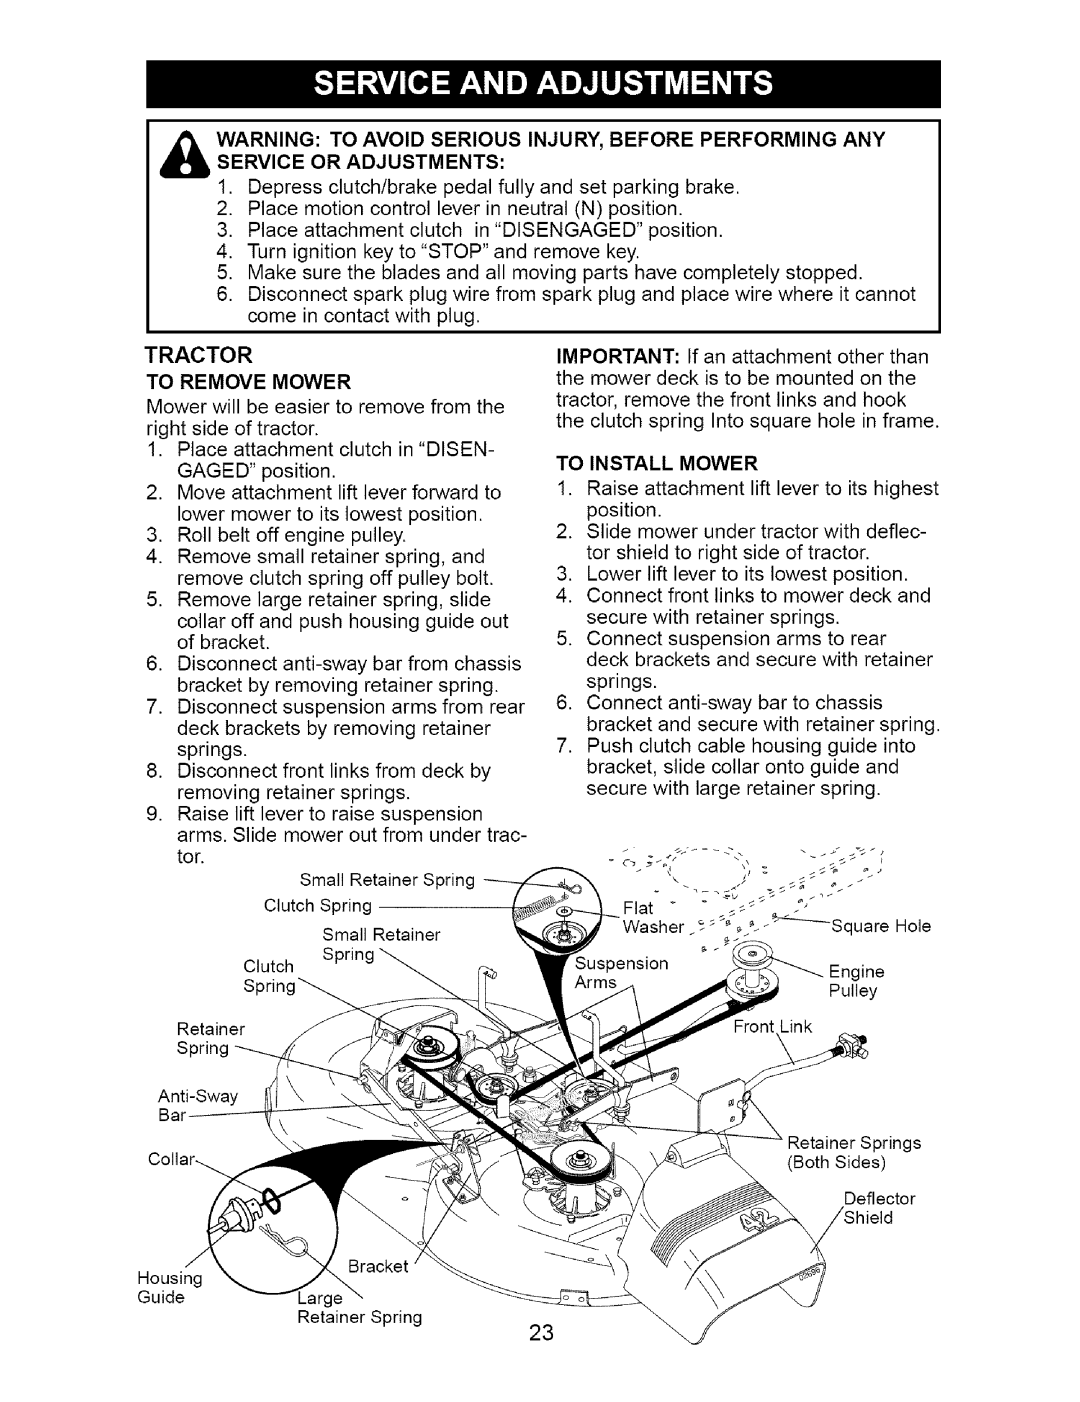 Craftsman 917.274762 owner manual Tractor, To Remove Mower, To Install Mower 